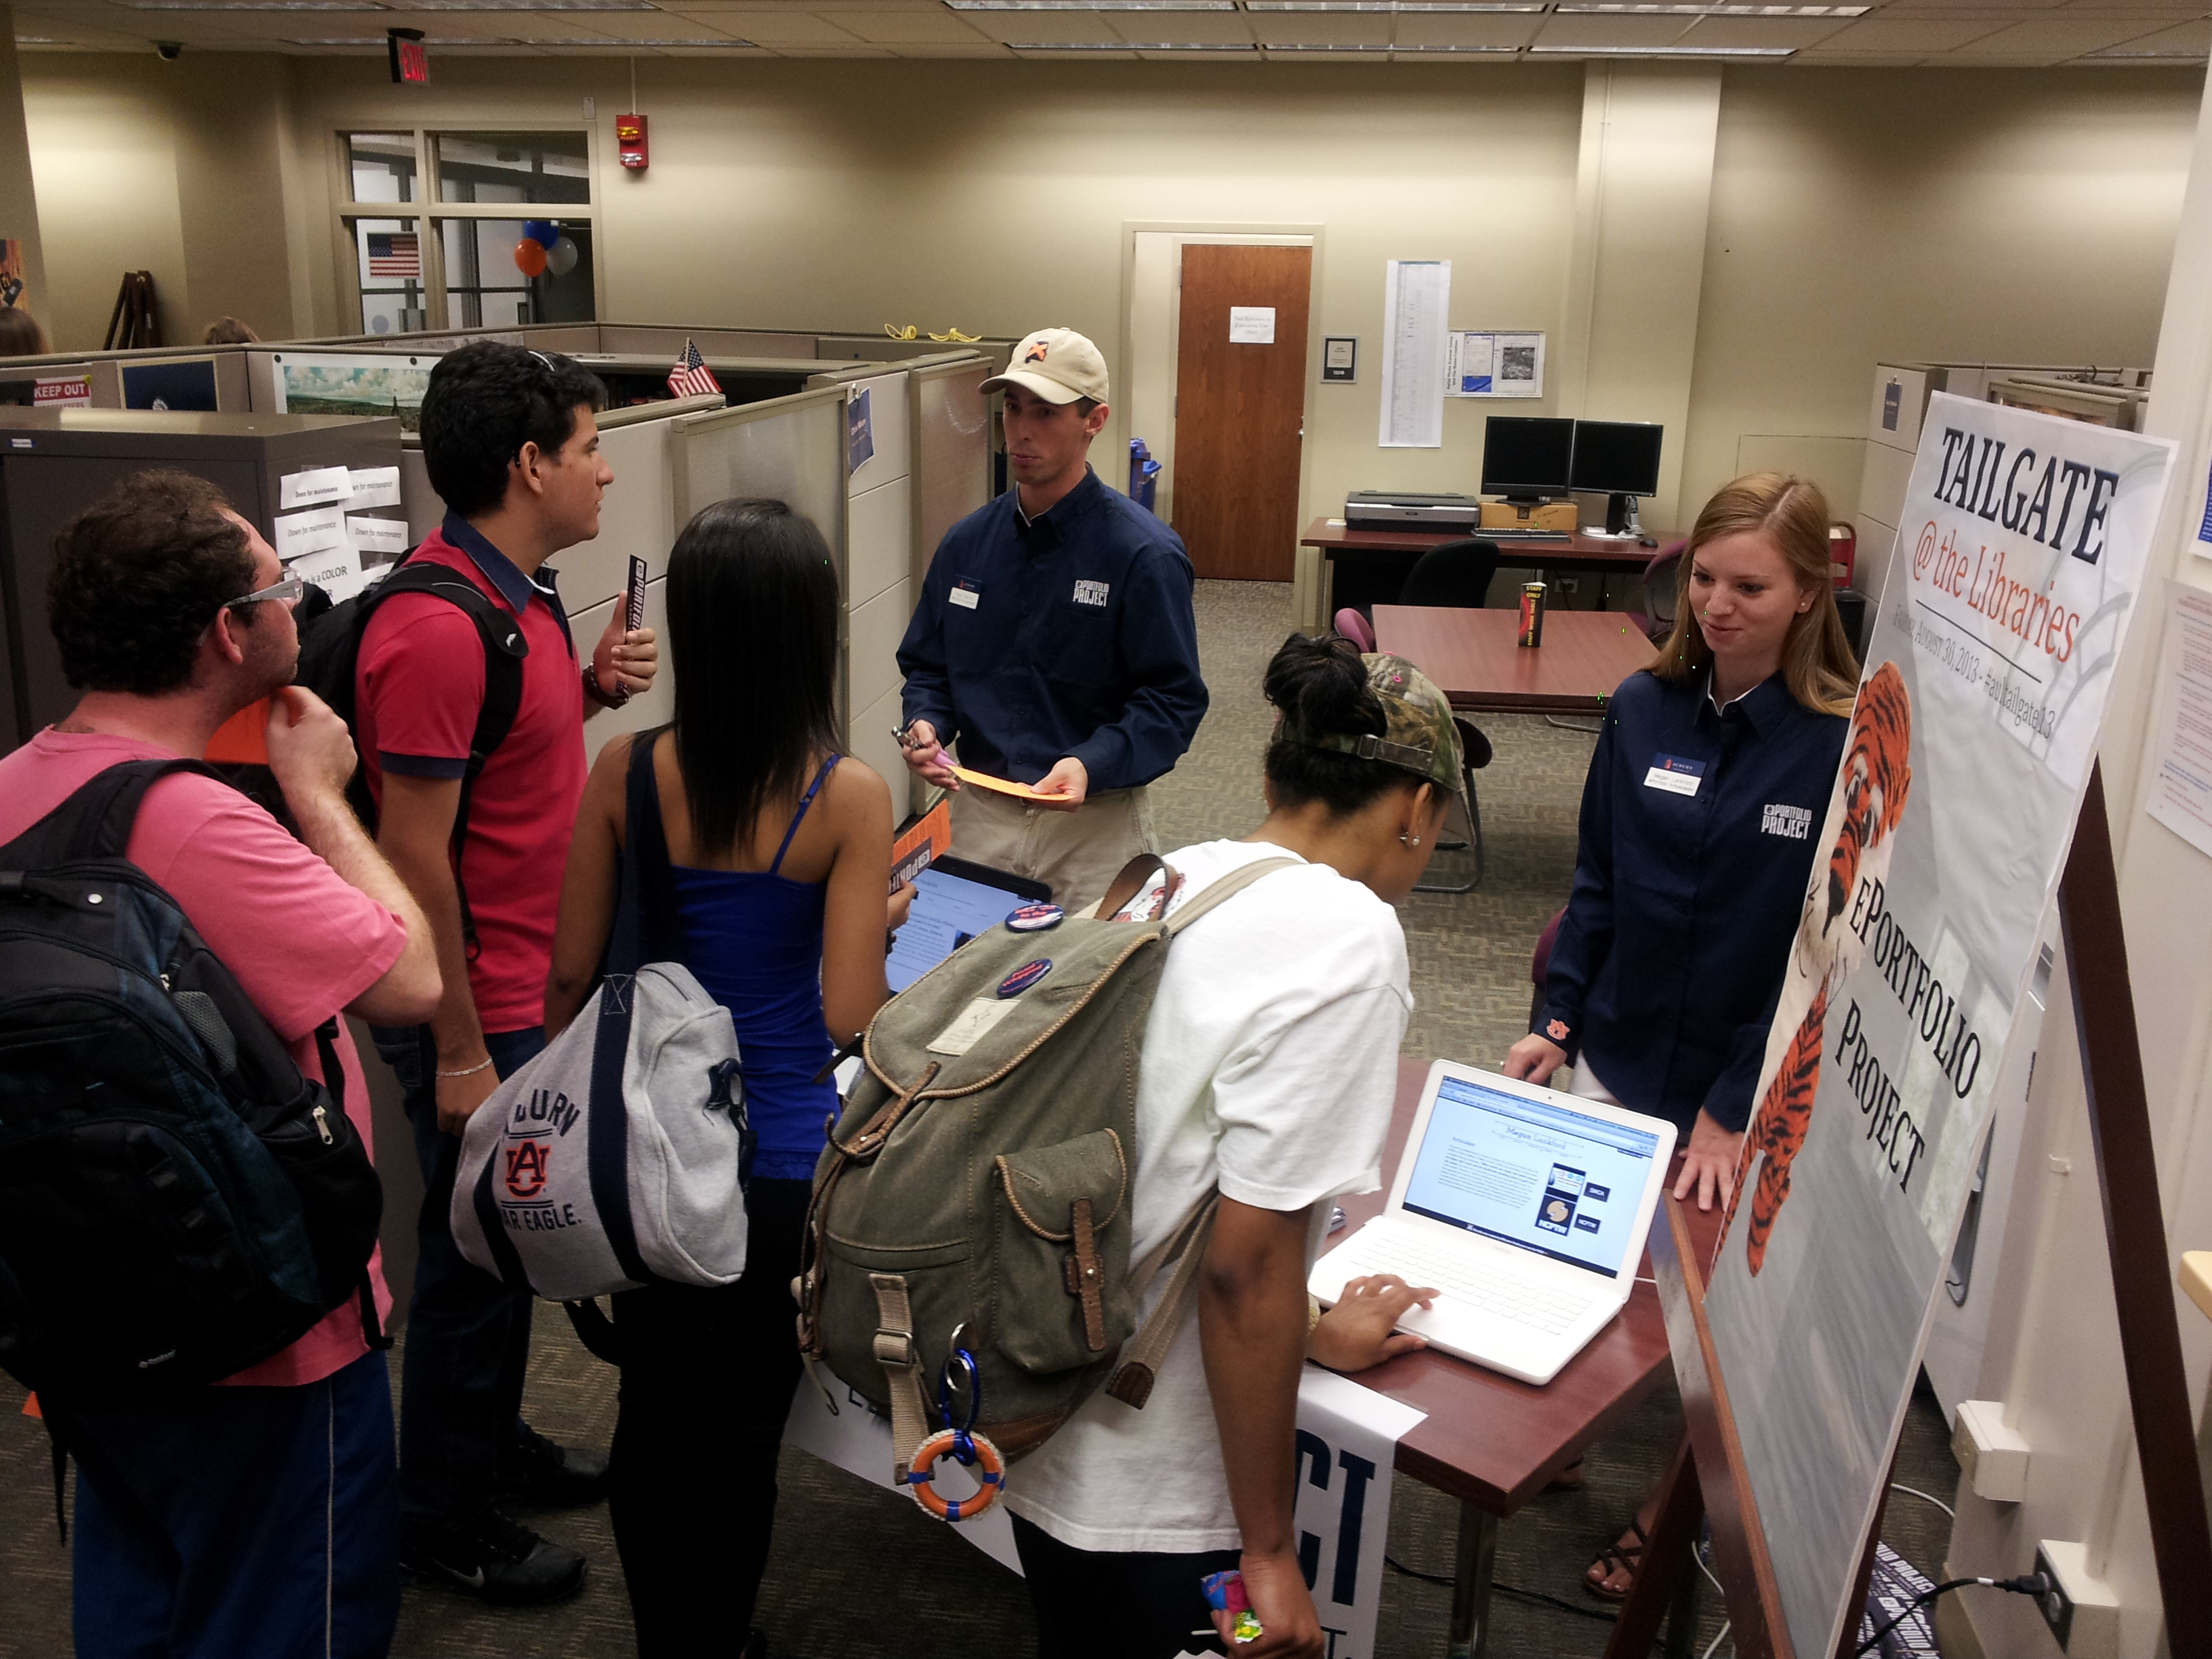 ePortfolio student ambassadors talking to other students next to an advertising poster